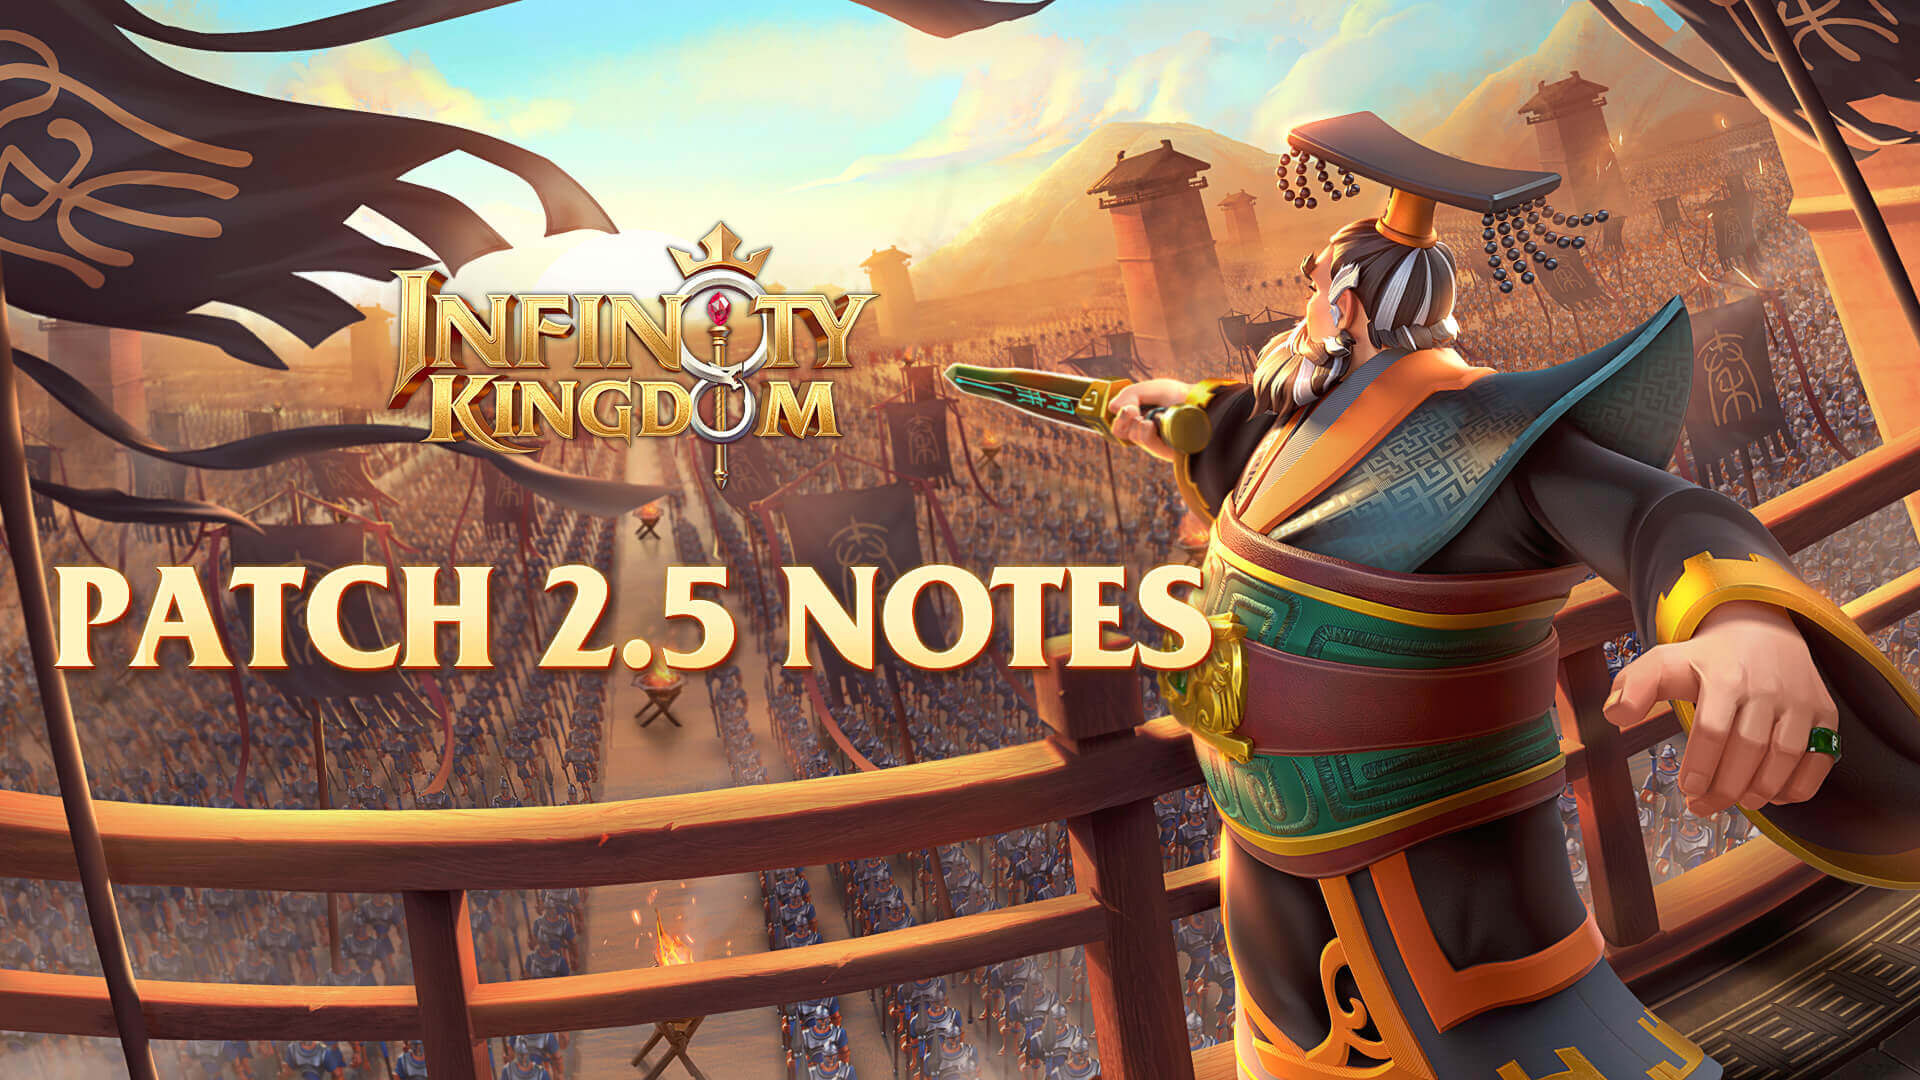 Patch 2.5 Notes